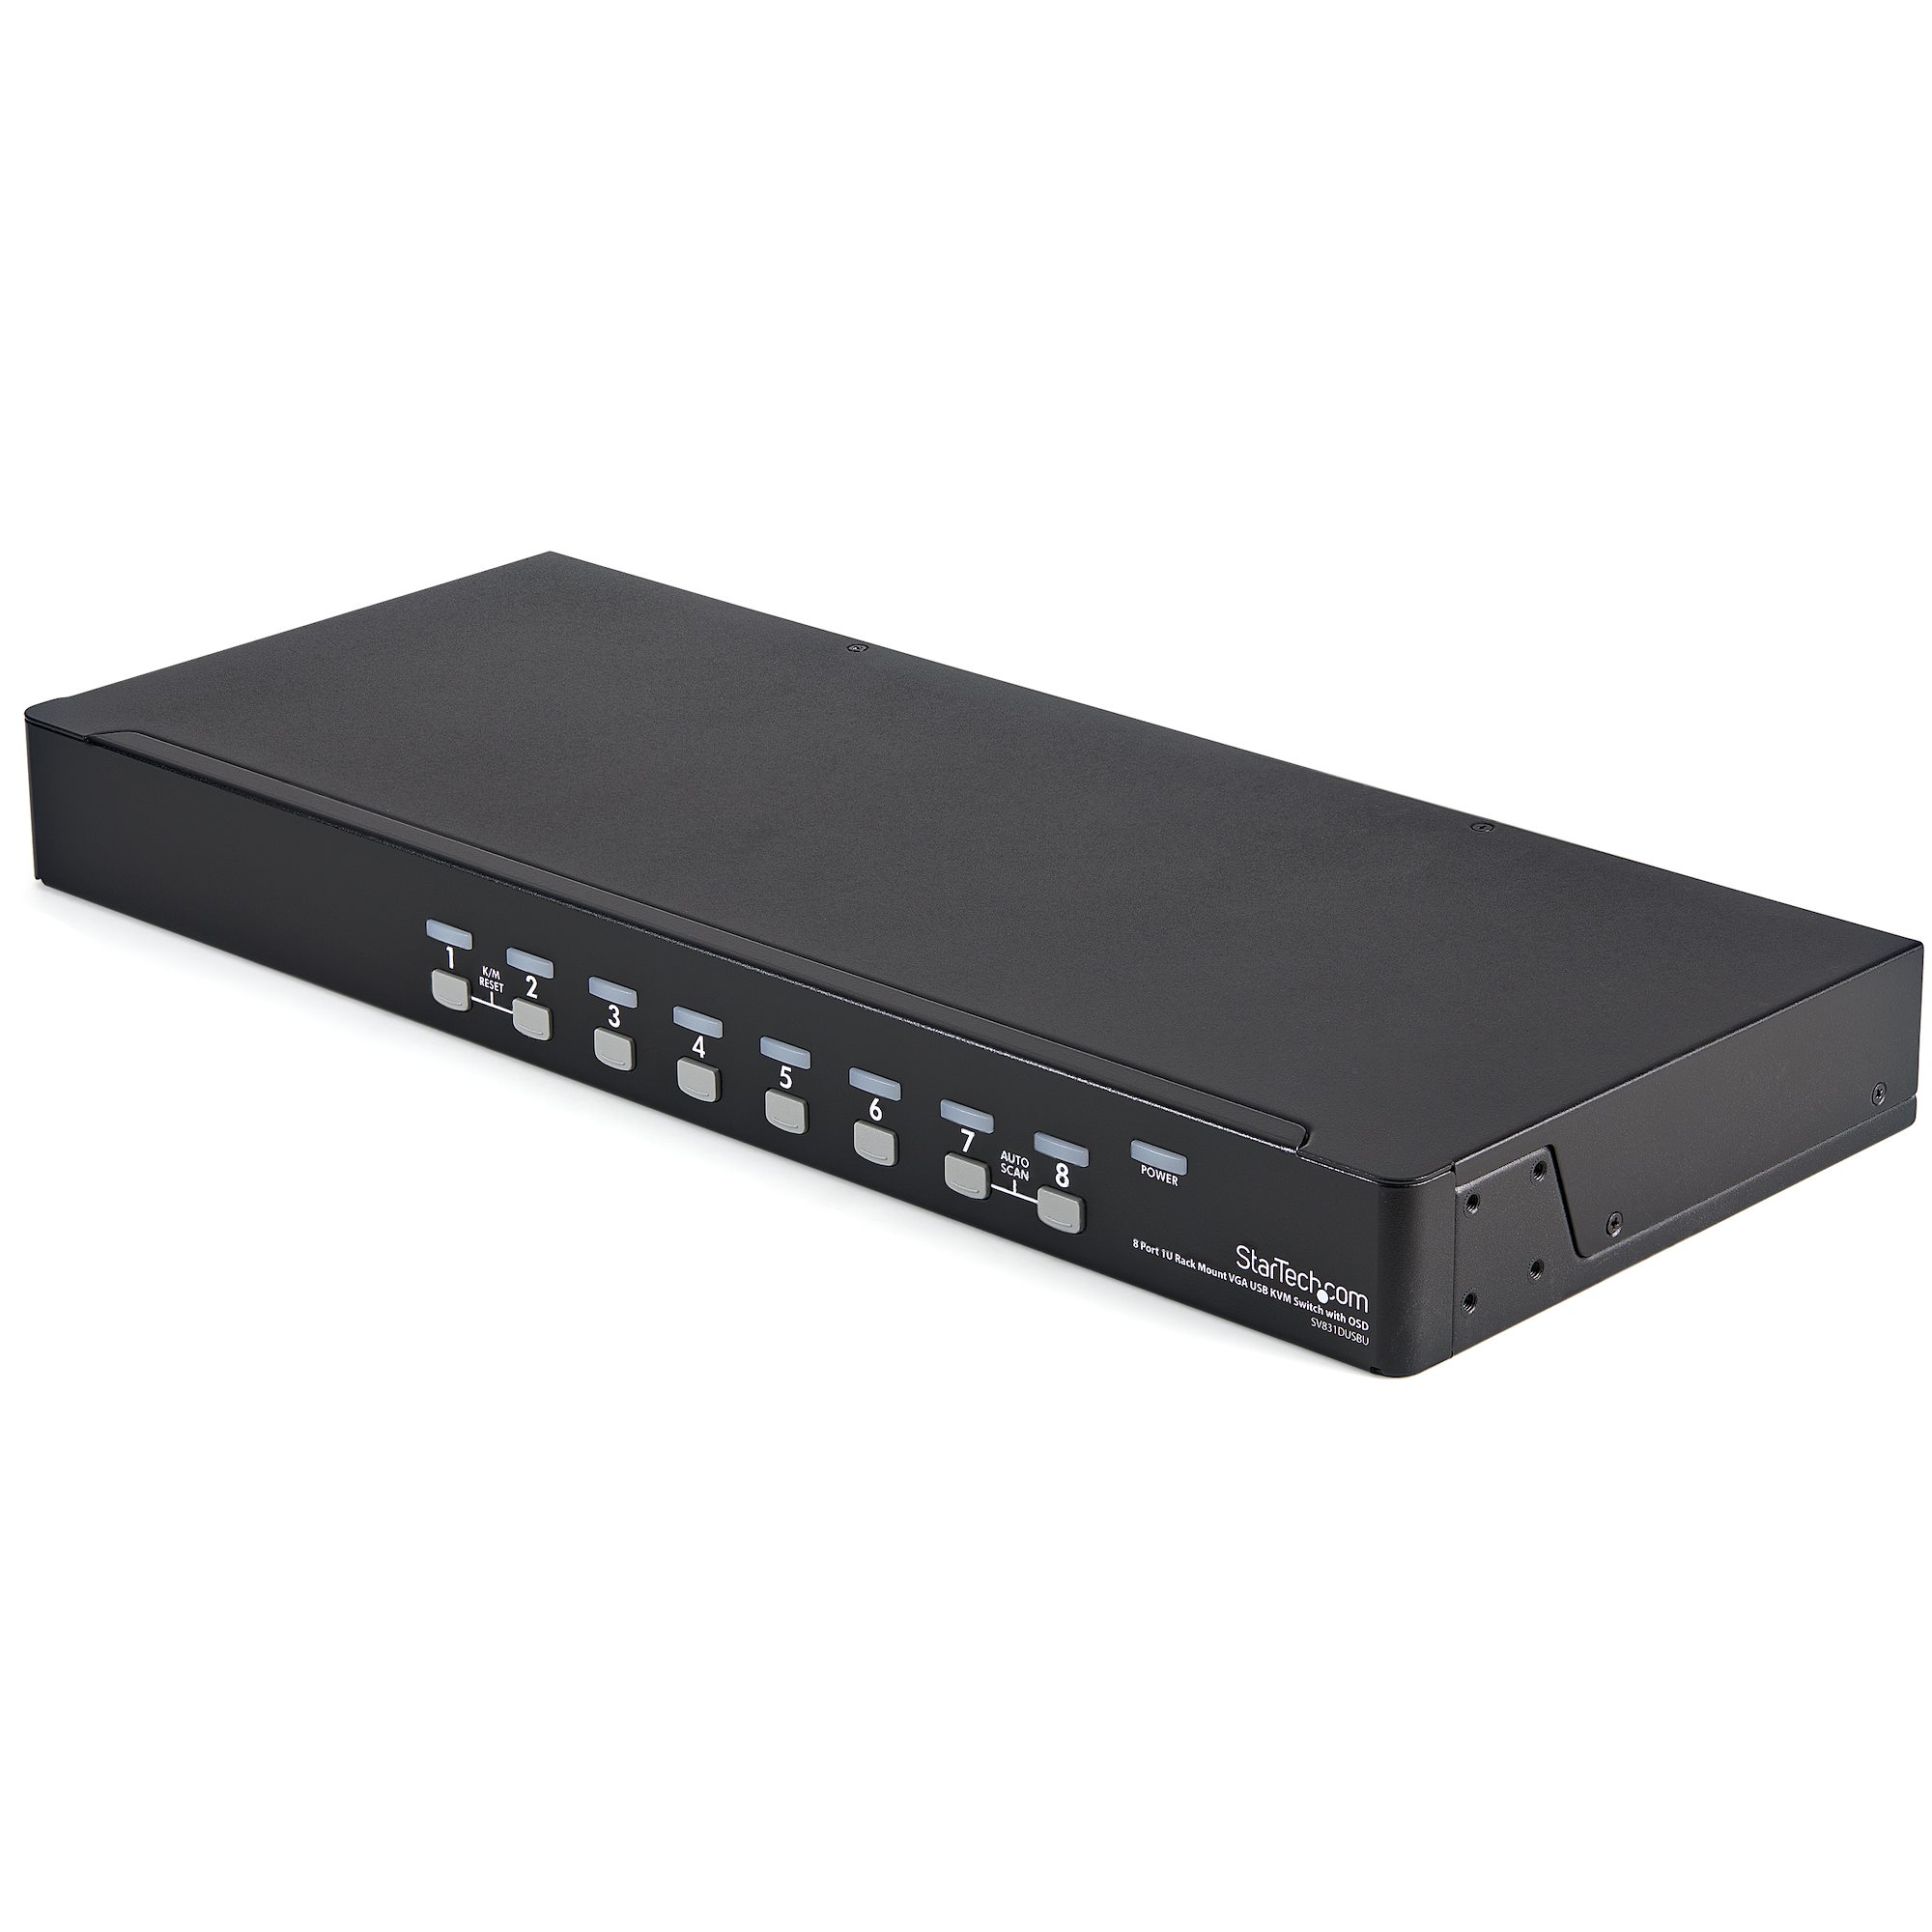 8 Ports Dual Console KVM Switch with Serial Control, OSD, 1U Rack Mount,  Built-in AC Power, UCNV-S108QD